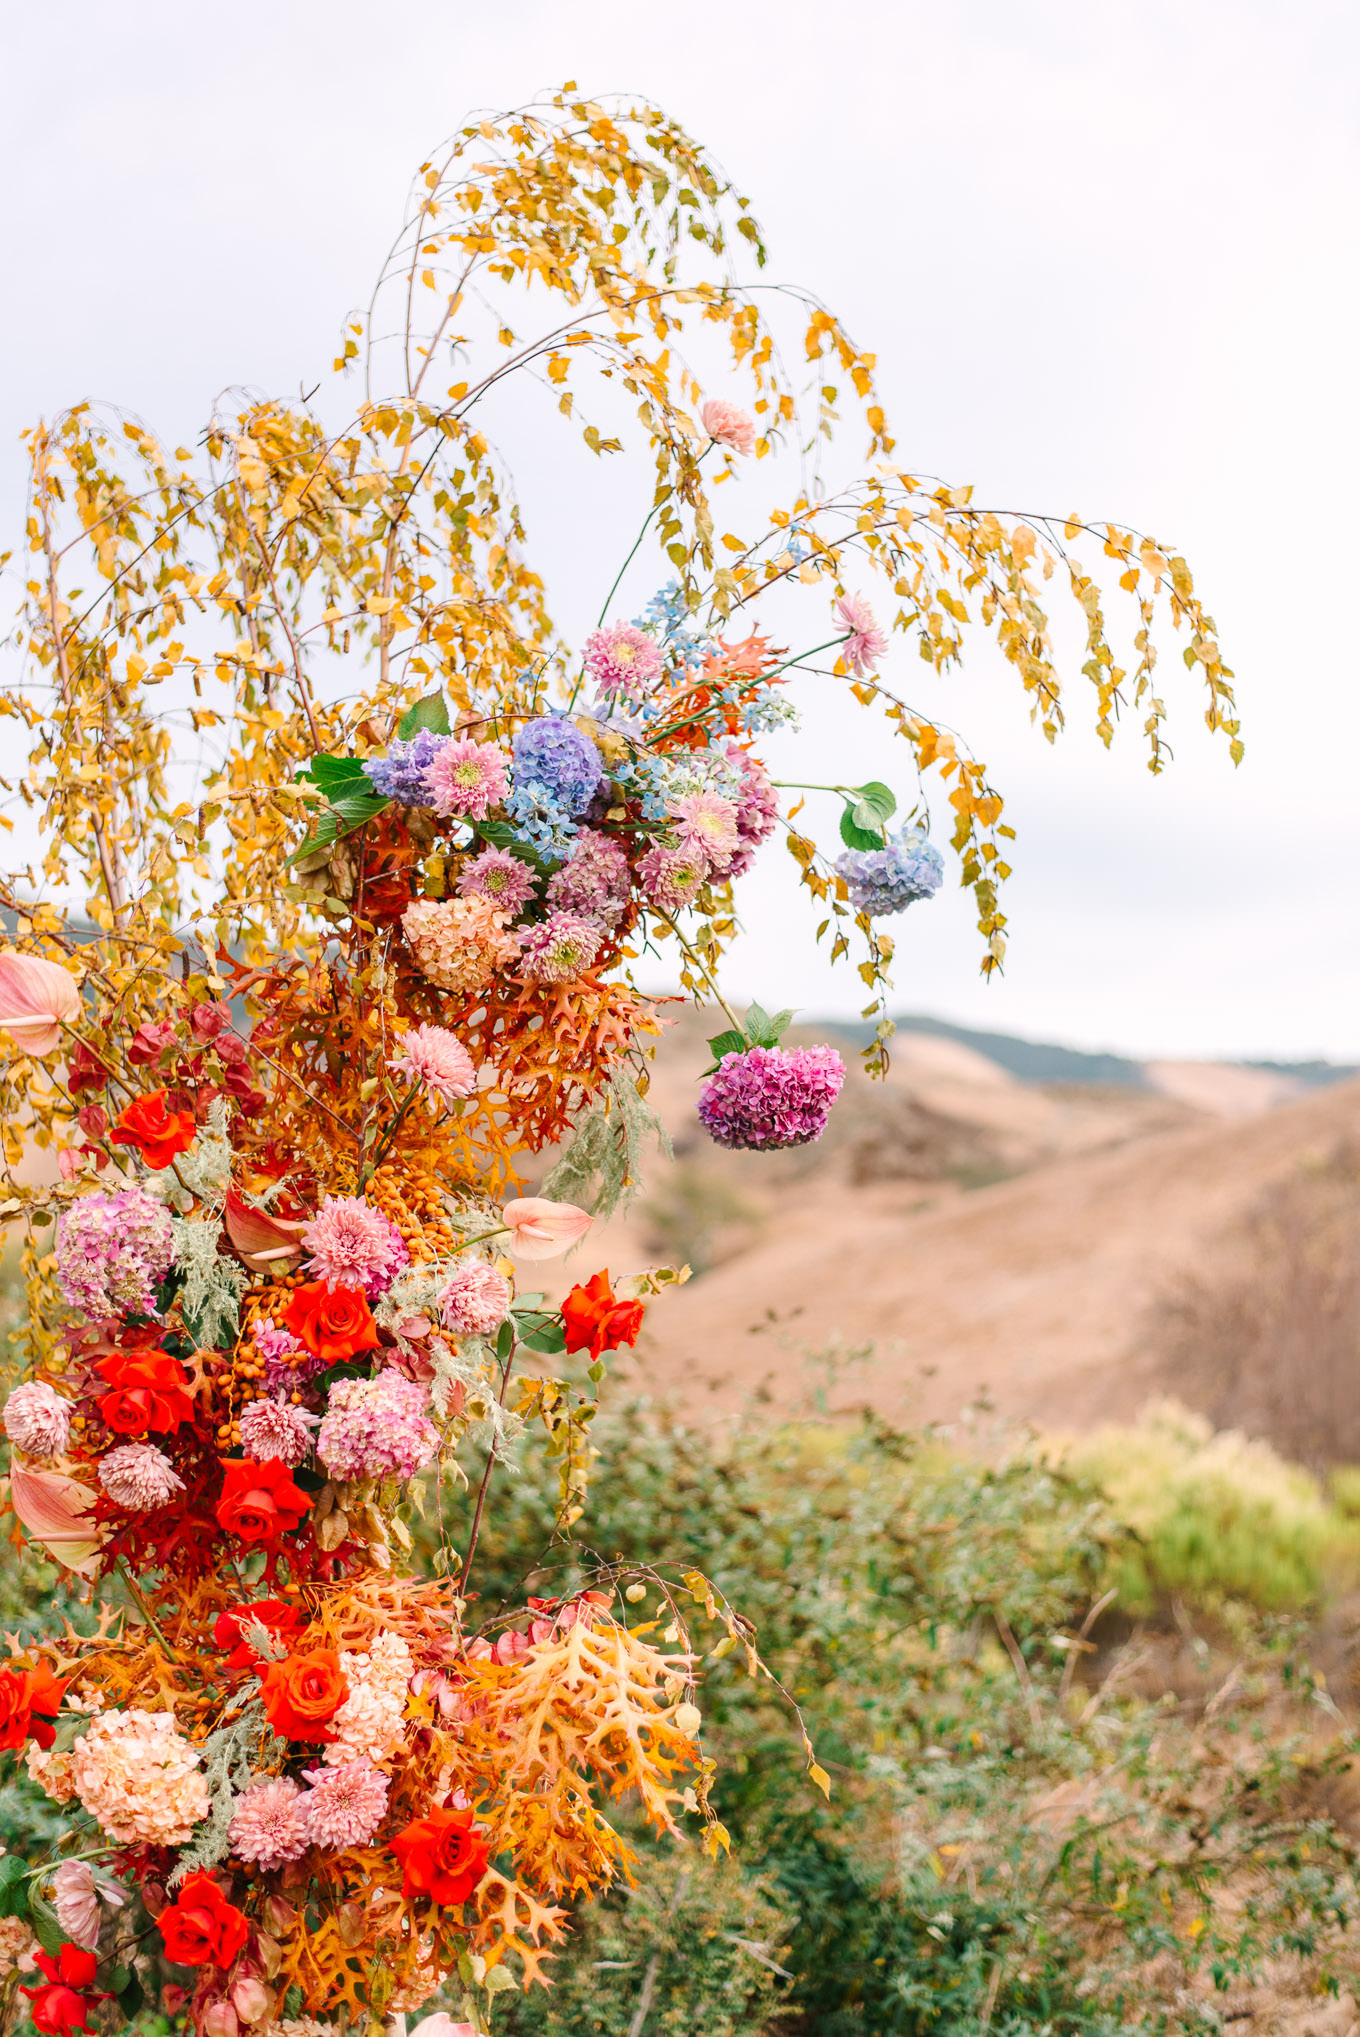 Vibrant floral arches for wedding ceremony | Colorful and quirky wedding at Higuera Ranch in San Luis Obispo | #sanluisobispowedding #californiawedding #higueraranch #madonnainn   
Source: Mary Costa Photography | Los Angeles
